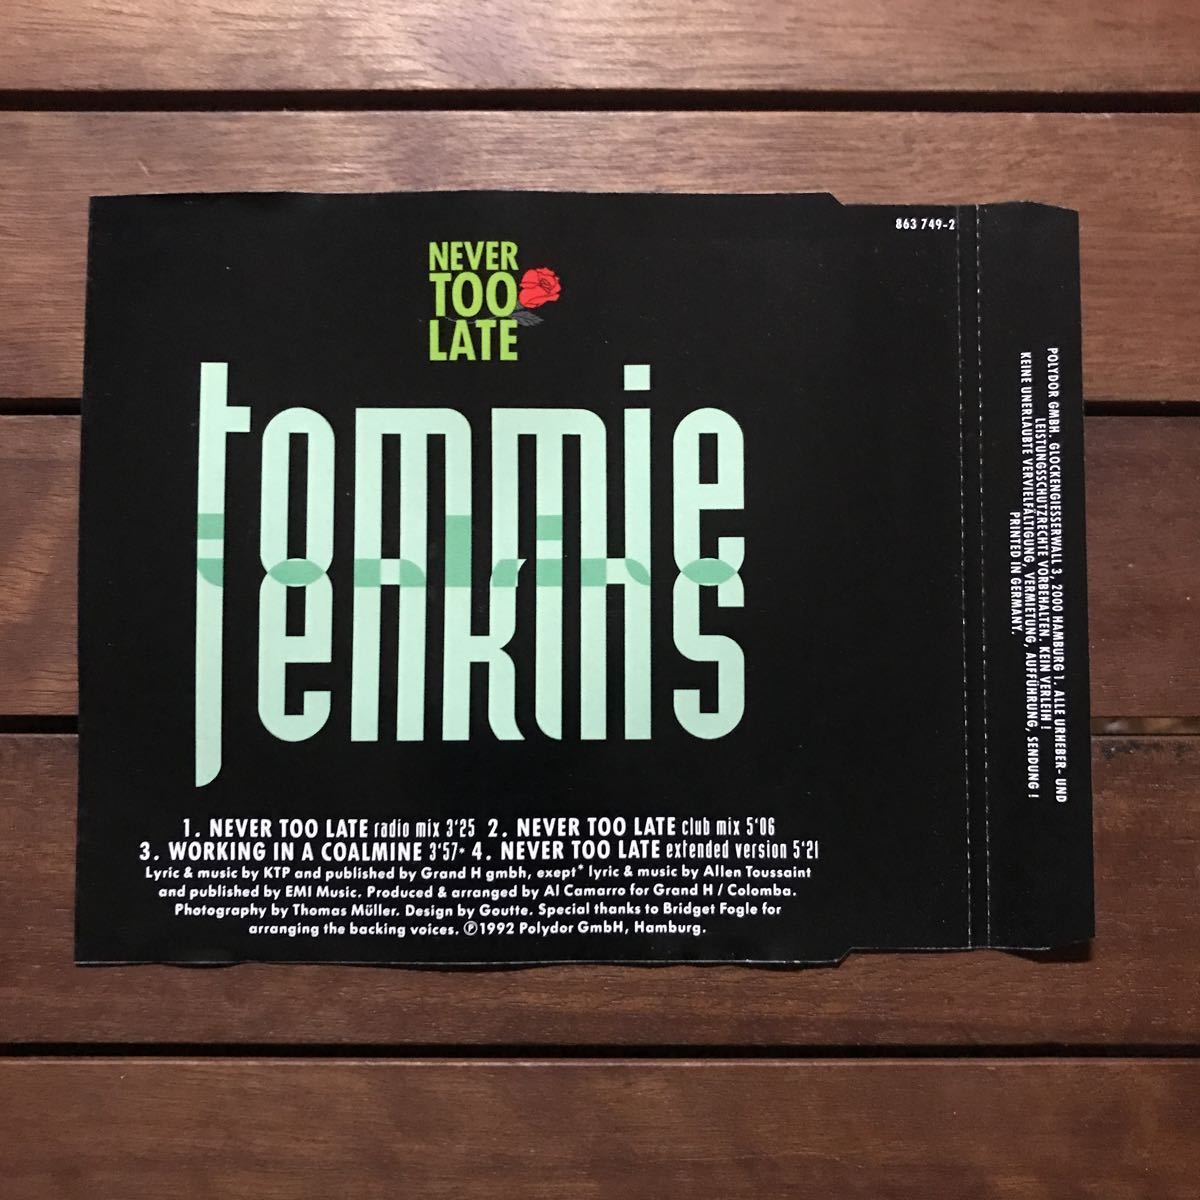 【r&b】Tommie Jenkins / Never Too Late［CDs］《7b076 9595》_画像2